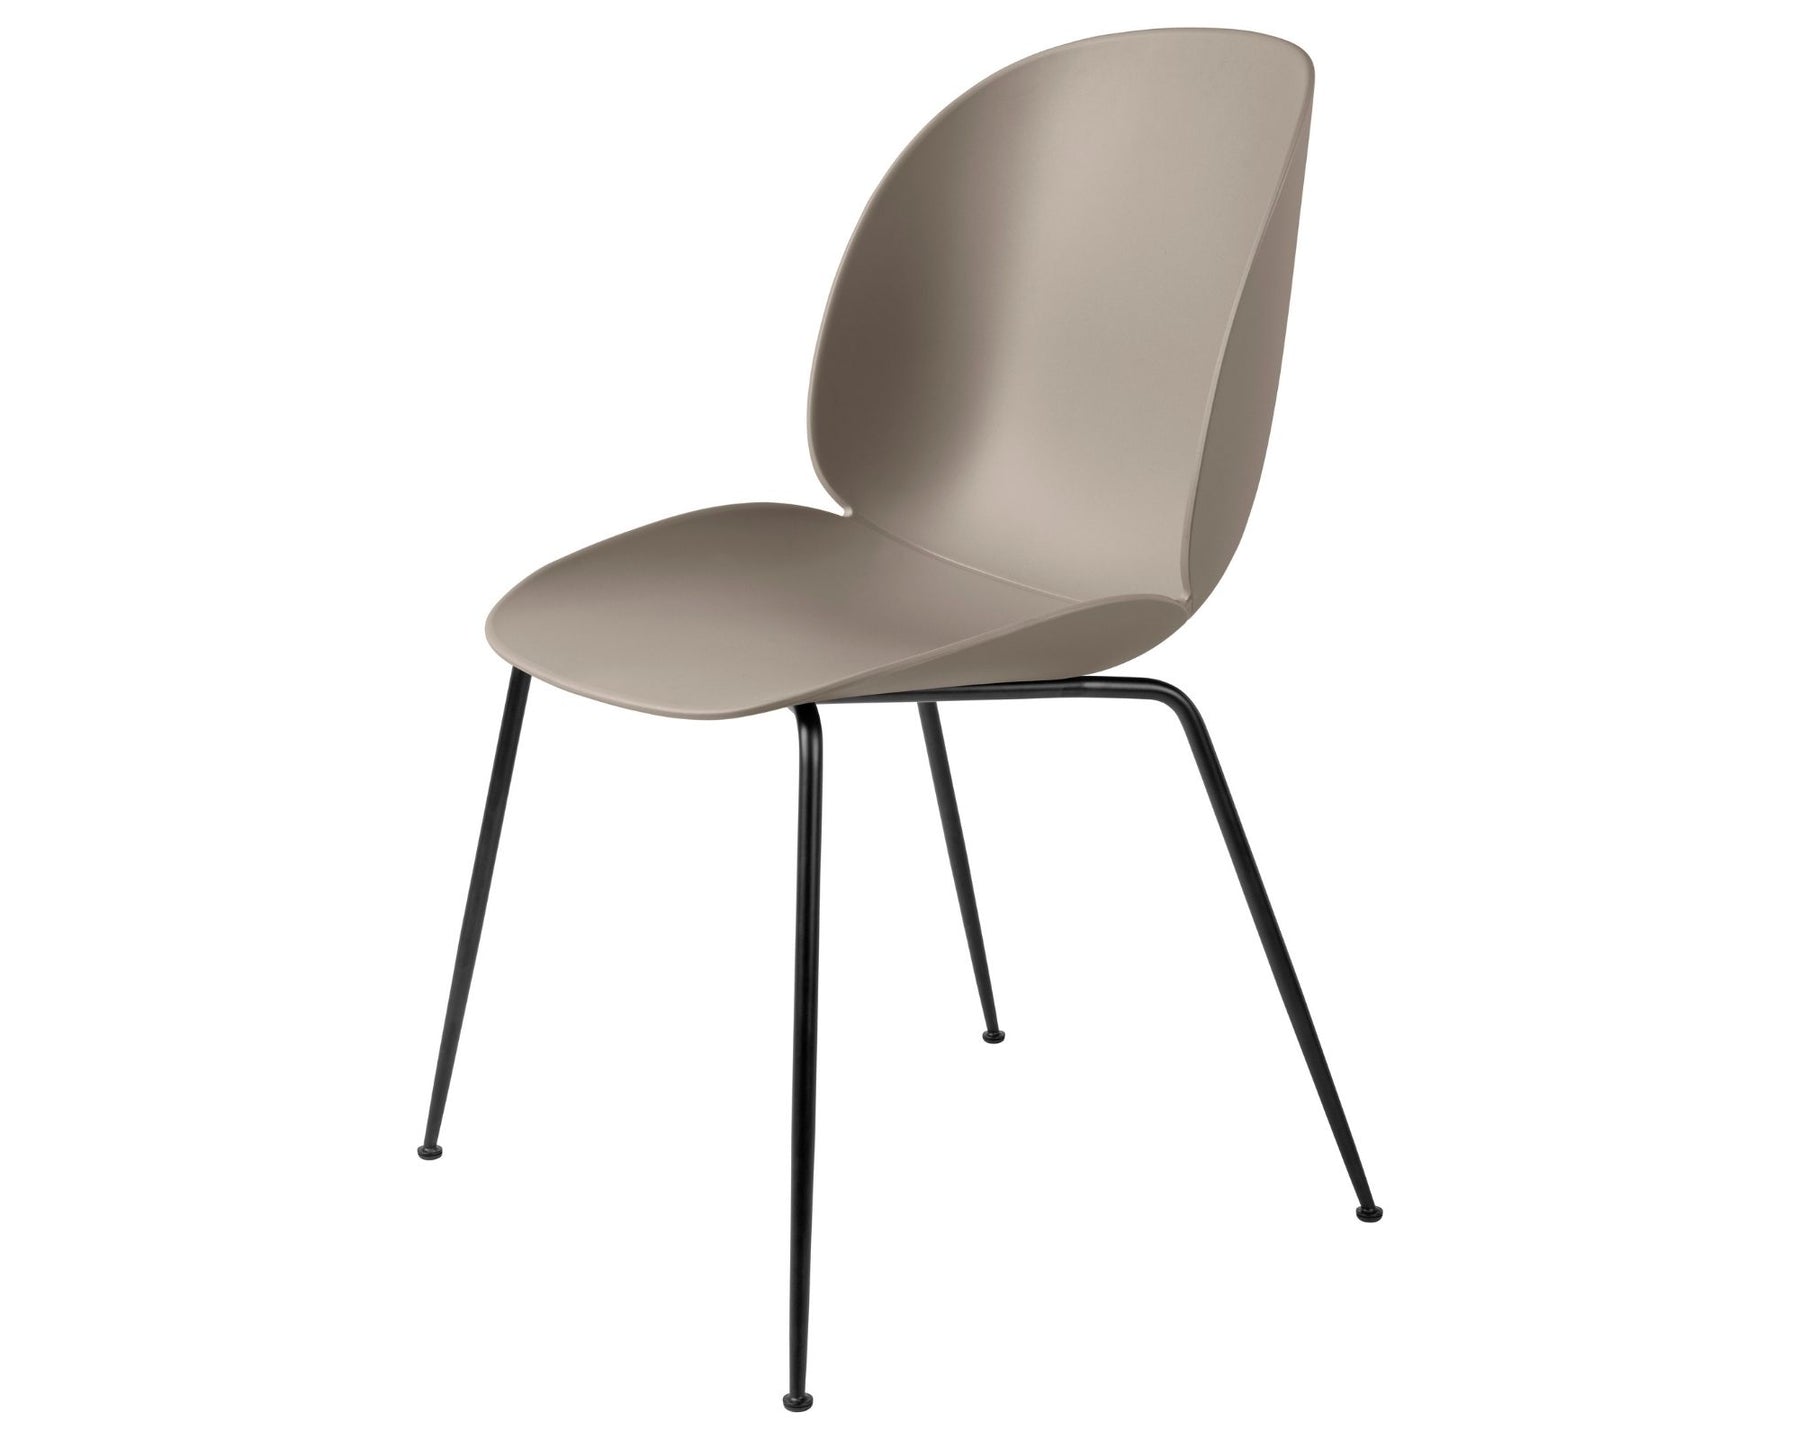 New Beige Dining Chair with Black Base | DSHOP